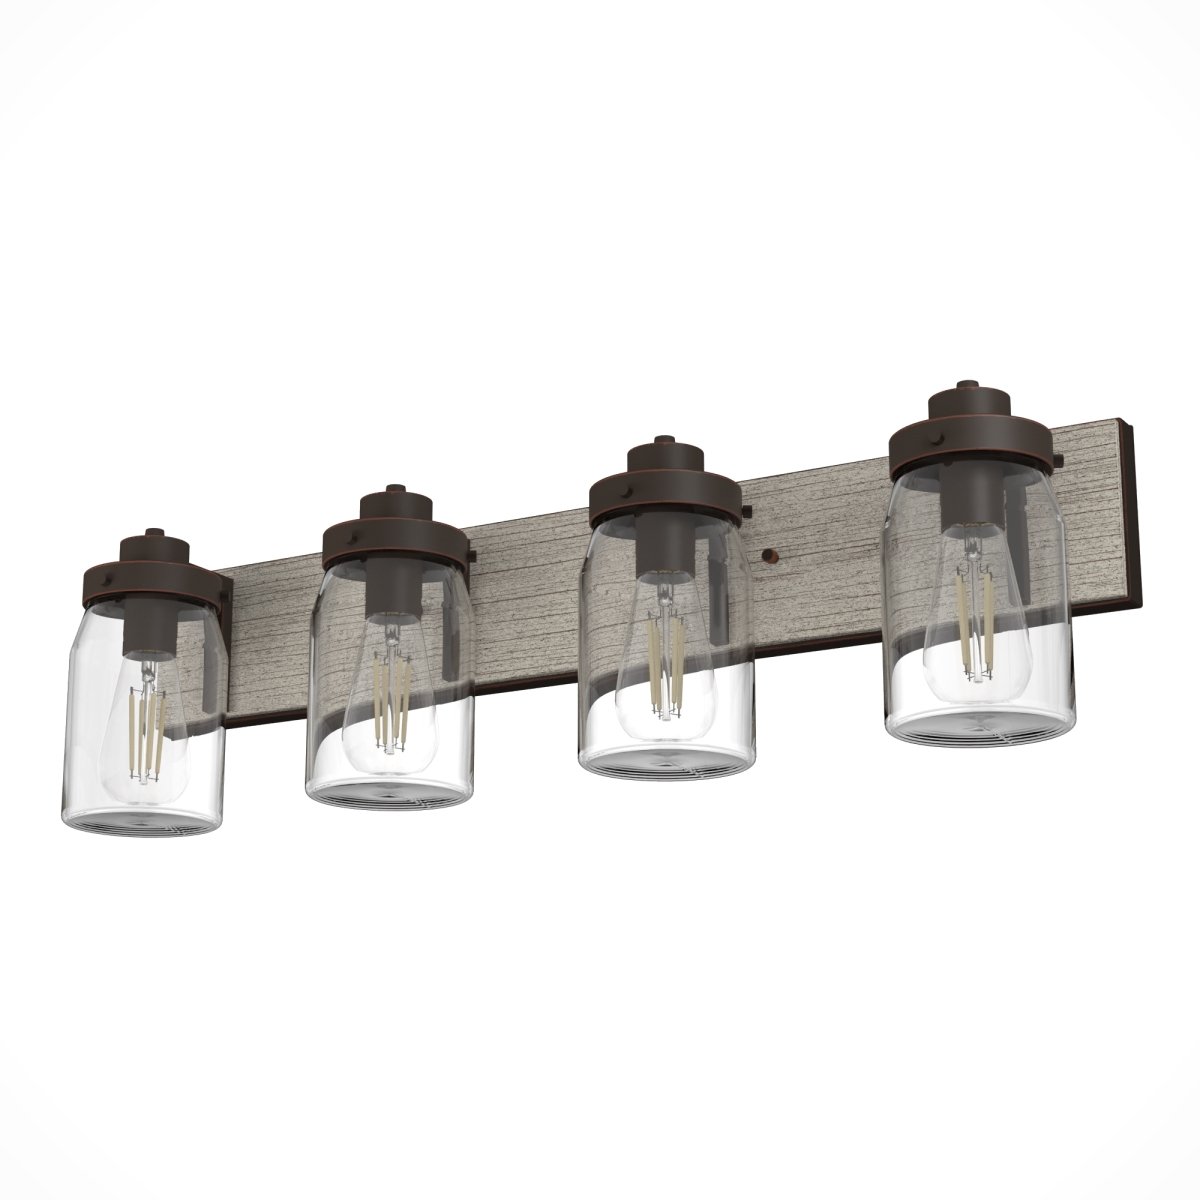 Picture of Hunter 48023 8.5 in. Devon Park Onyx Bengal & Barnwood with Clear Glass 4 Light Bathroom Vanity Wall Light Fixture